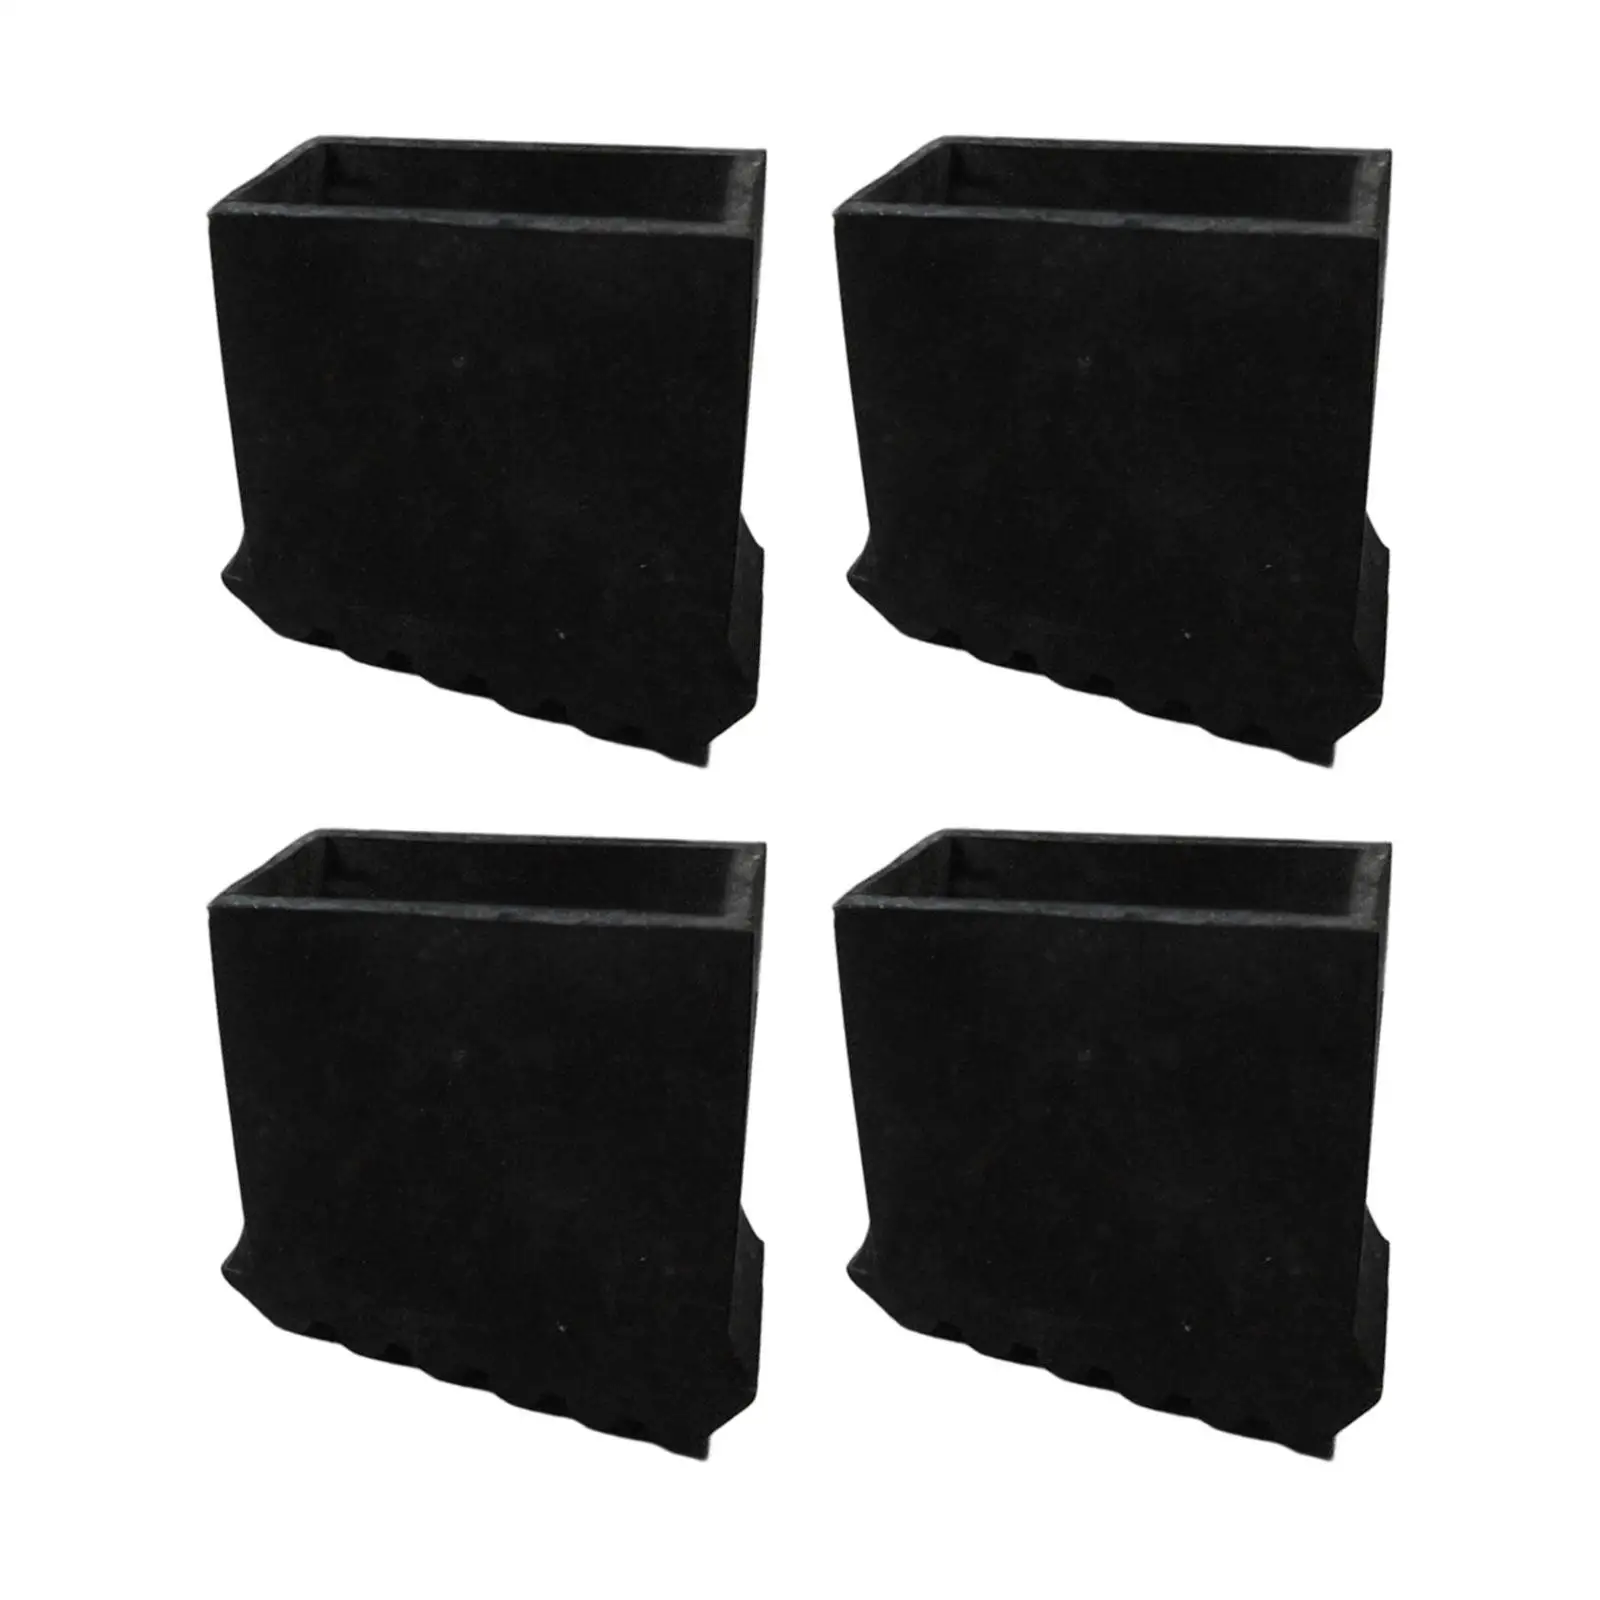 4Pcs Ladder Feet Pads Suitable for Most Ladders Cushion Universal Wear Resistance Protects Your Floor Ladder Non Slip Feet Mats